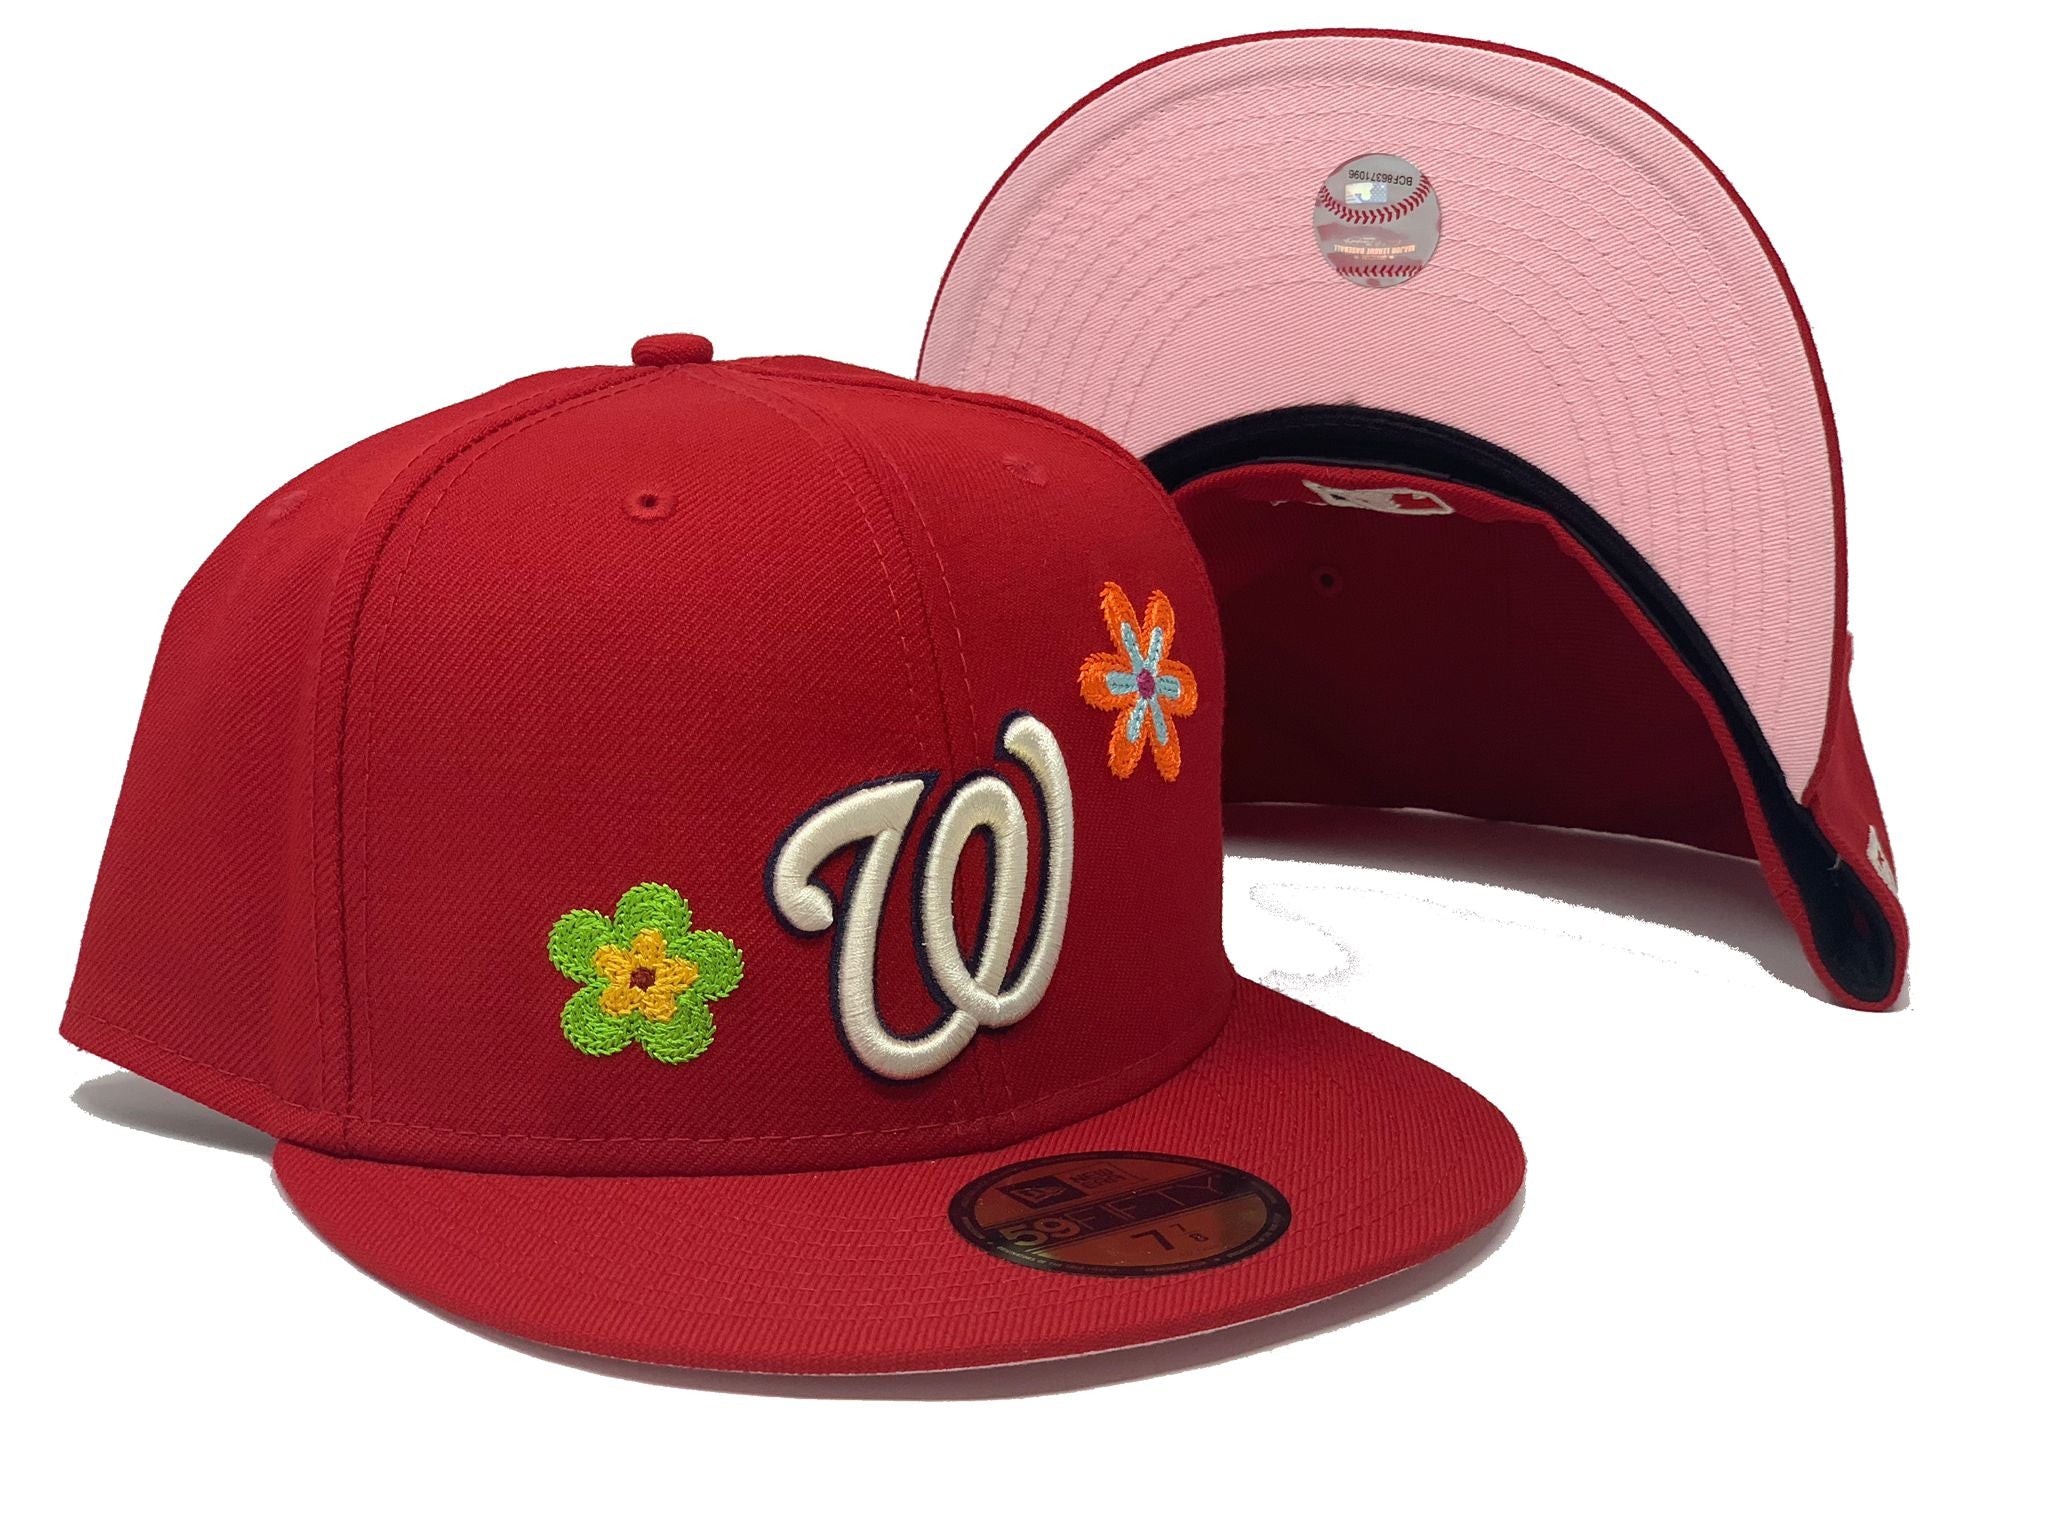 New Era Washington Nationals Chain Stitch Floral 59FIFTY Fitted Cap in Red — Major